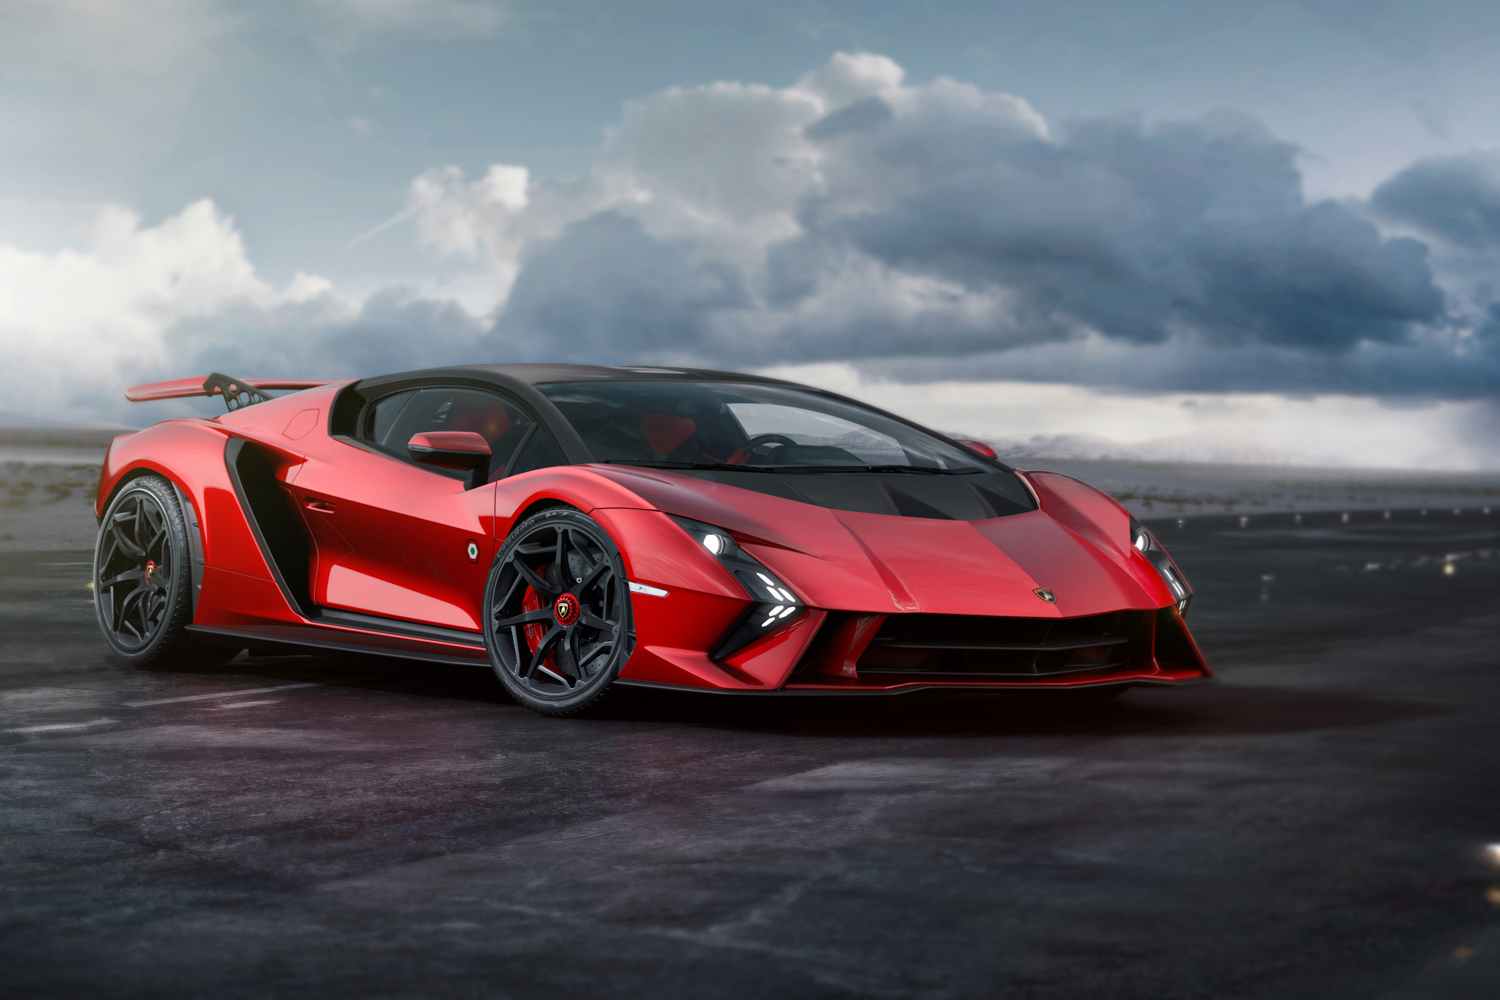 Lamborghini sees out V12 era with two one-off specials